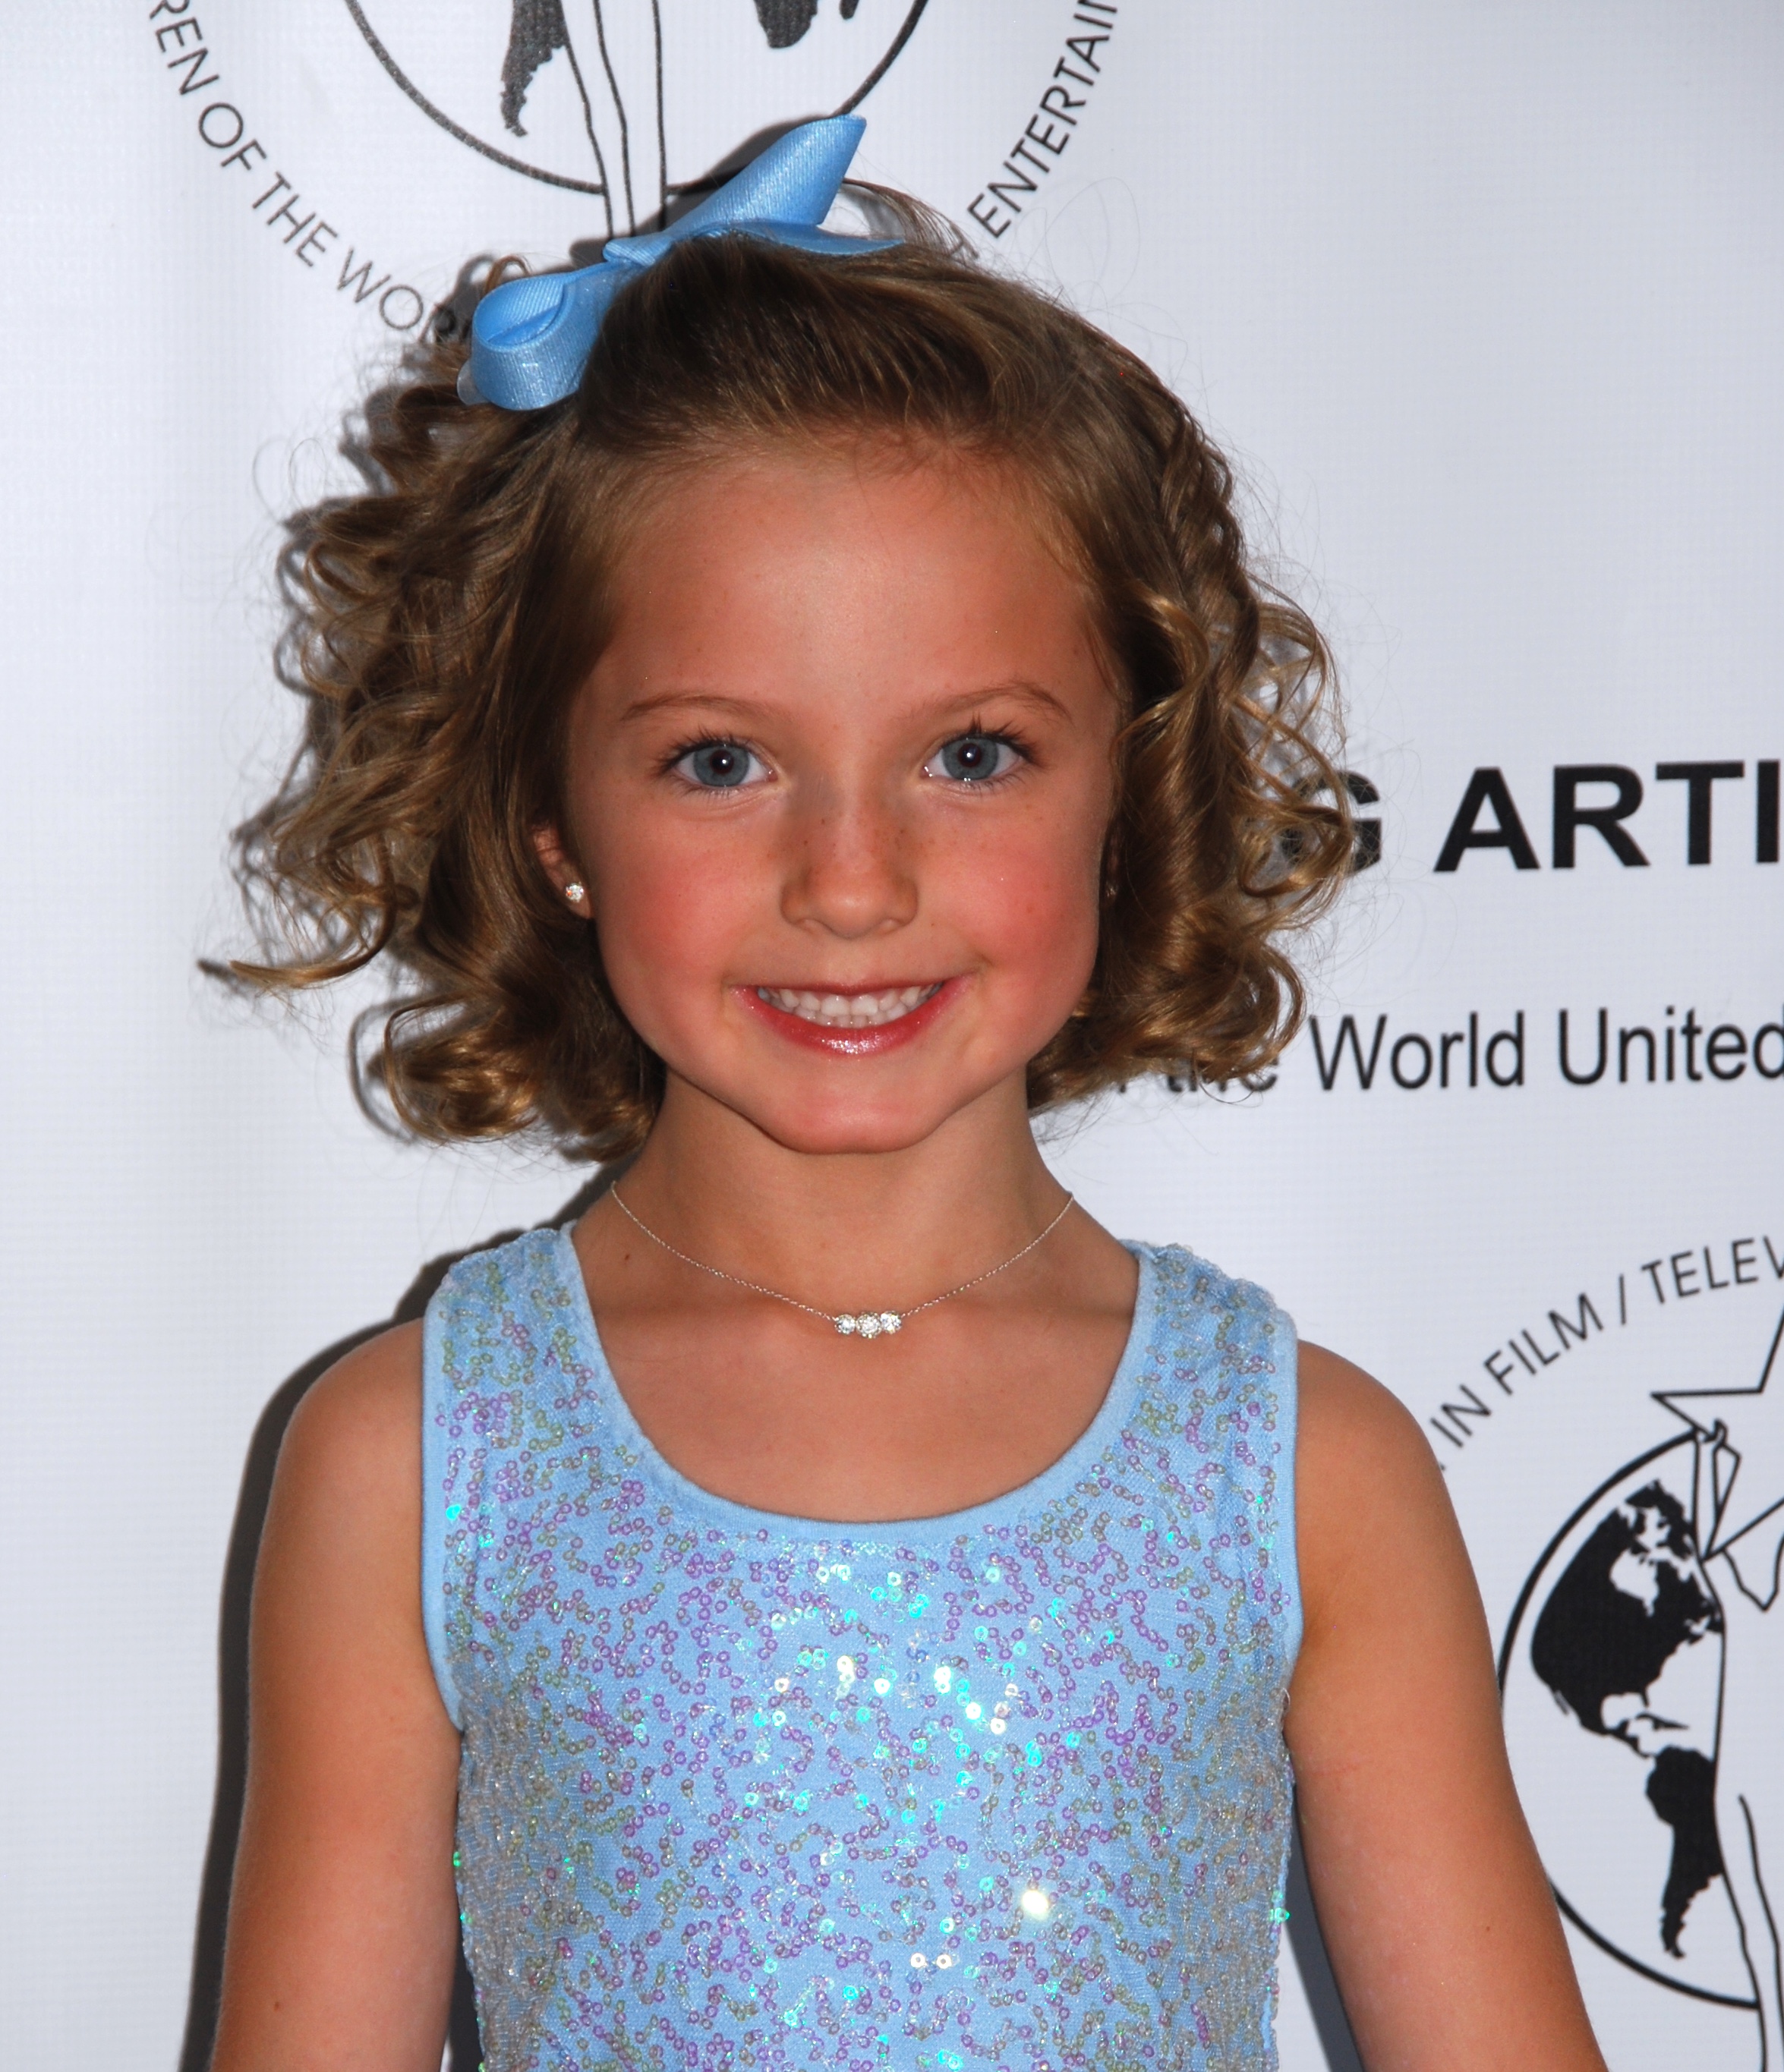 Sunnie at the Young Artist Awards